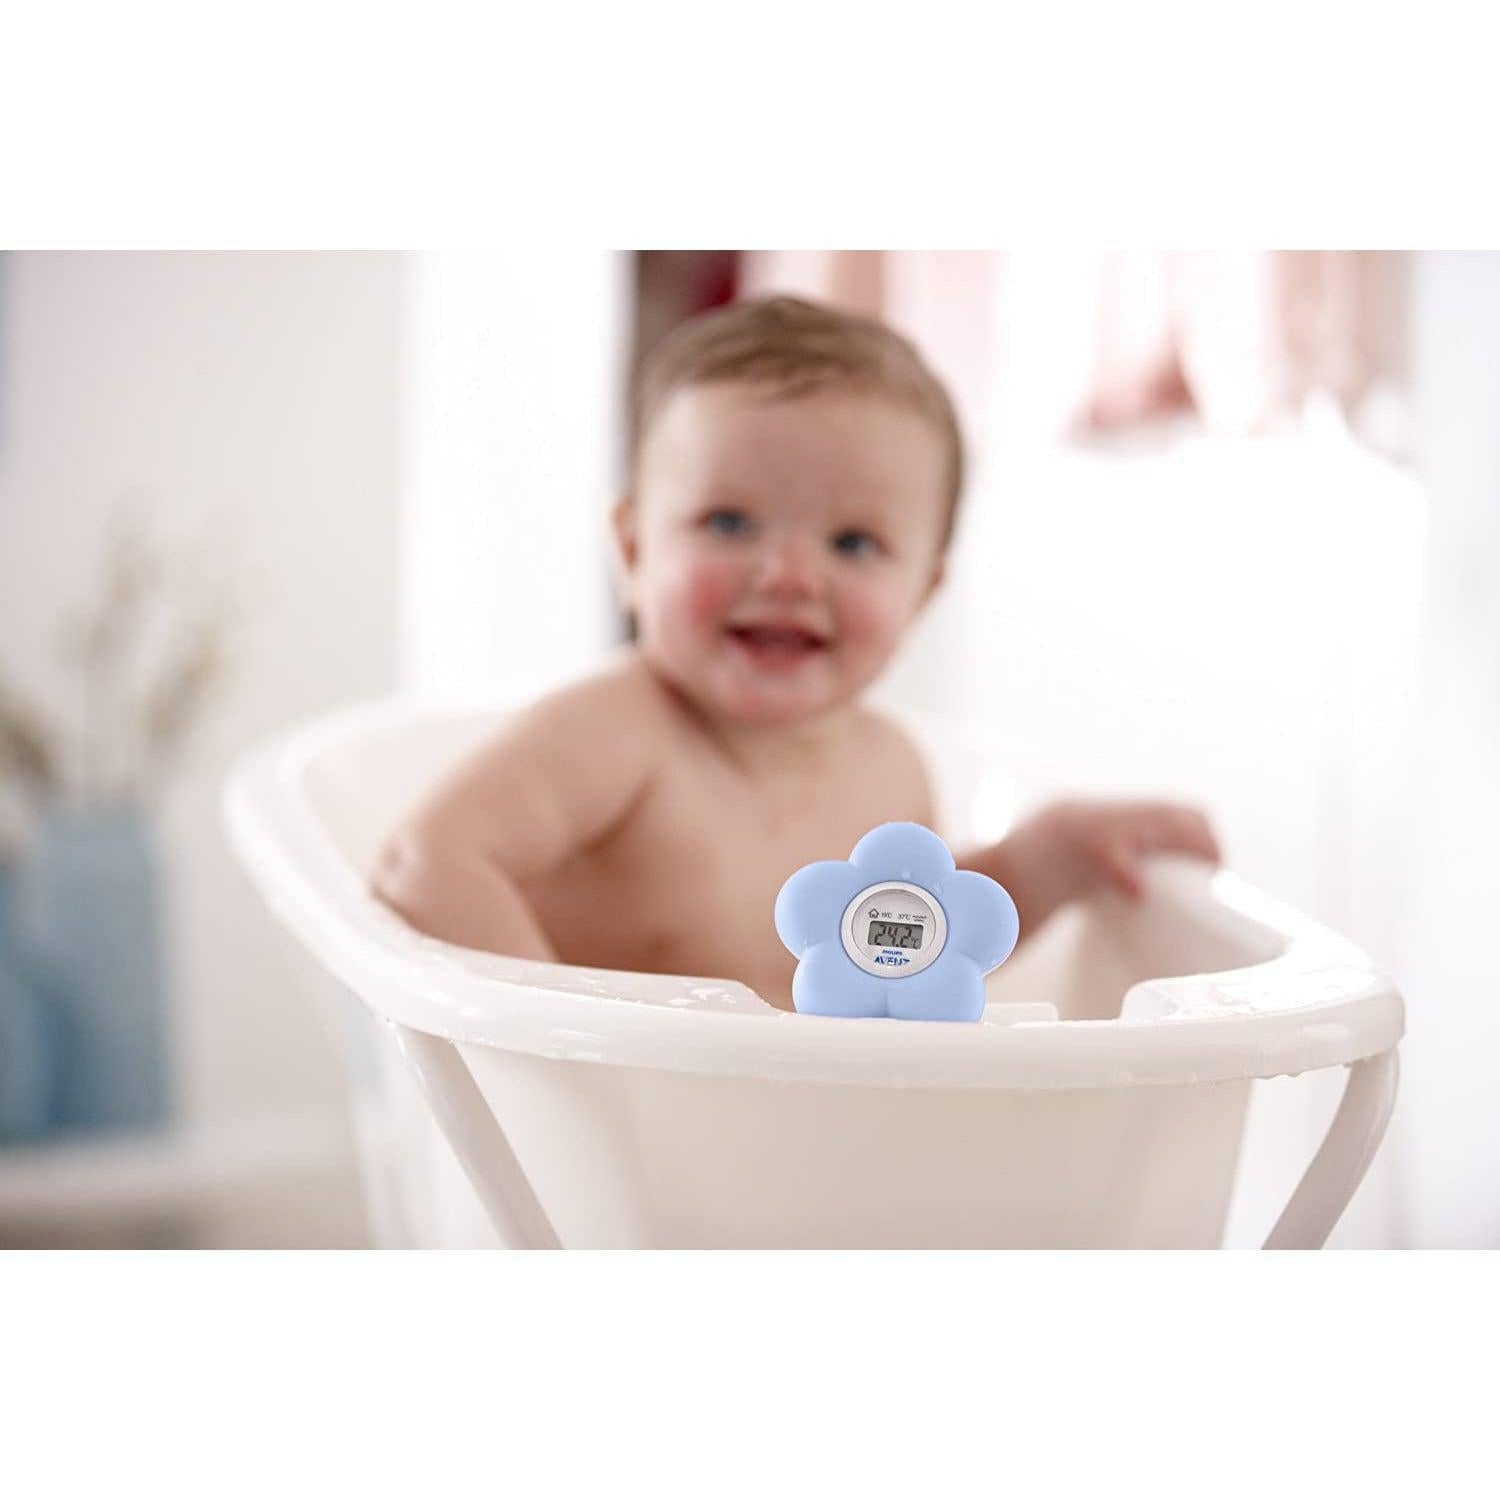 Philips Avent SCH550/20 Baby Digital Bath and Room Thermometer - Blue Flower - Healthxpress.ie